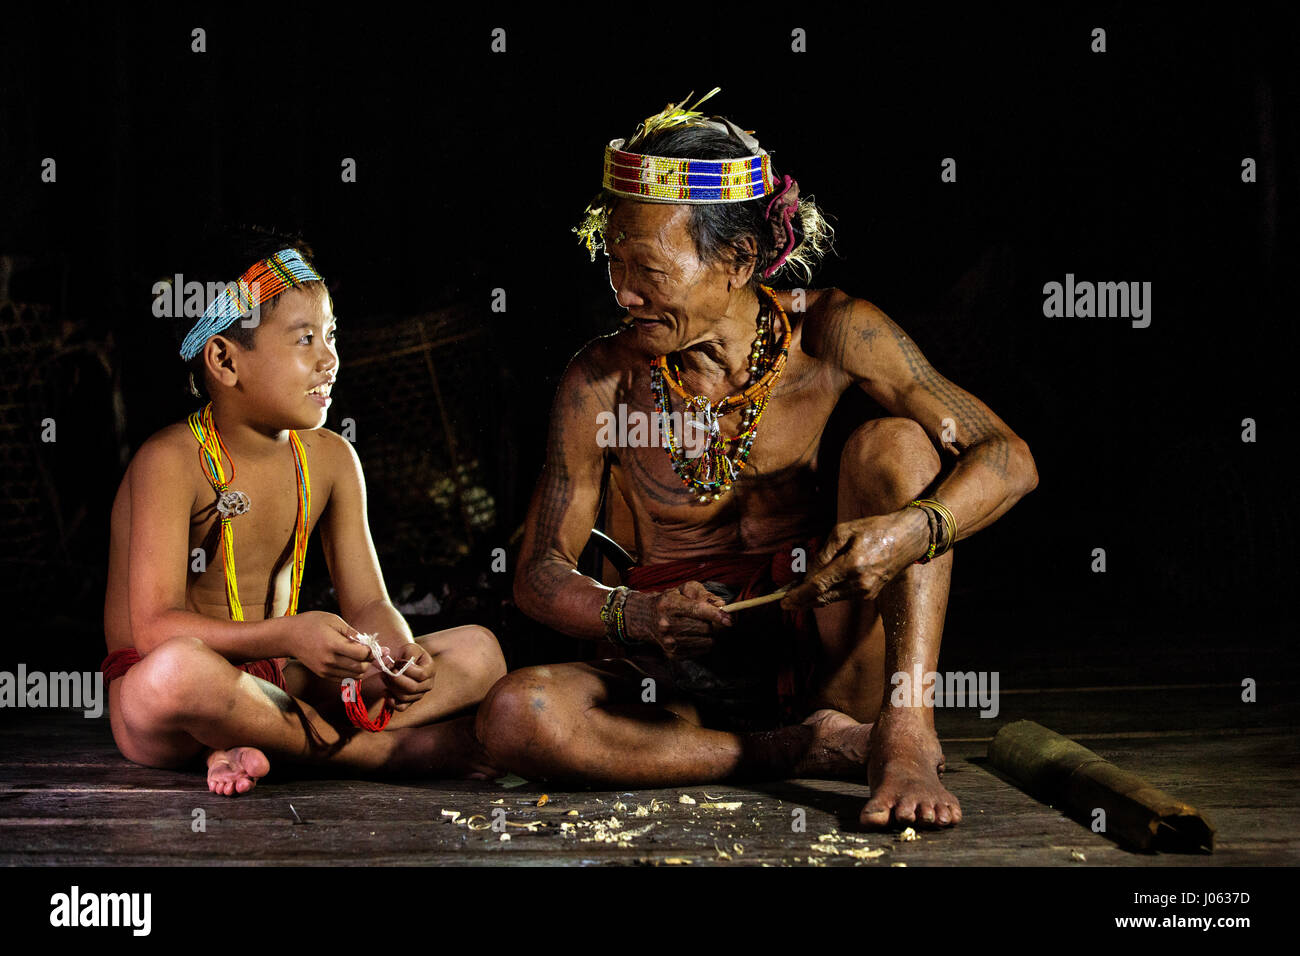 SIBERUT ISLAND, INDONESIA: MAGNIFICENT photographs of the last members of a tattooed tribe give an insight into their daily lives on the isolated island they call home. The Mentawai Tribe live a basic and traditional lifestyle away from the technology of the 21st Century. The photographs show the tribe hunting in vast tropical jungle and captured personal moments as a father handed down tribal traditions to his son. These people are the last to use their tribal technique of hand-tapping to tattoo their bodies. They inhabit Siberut Island in Indonesia and were intimately photographed by Henry K Stock Photo